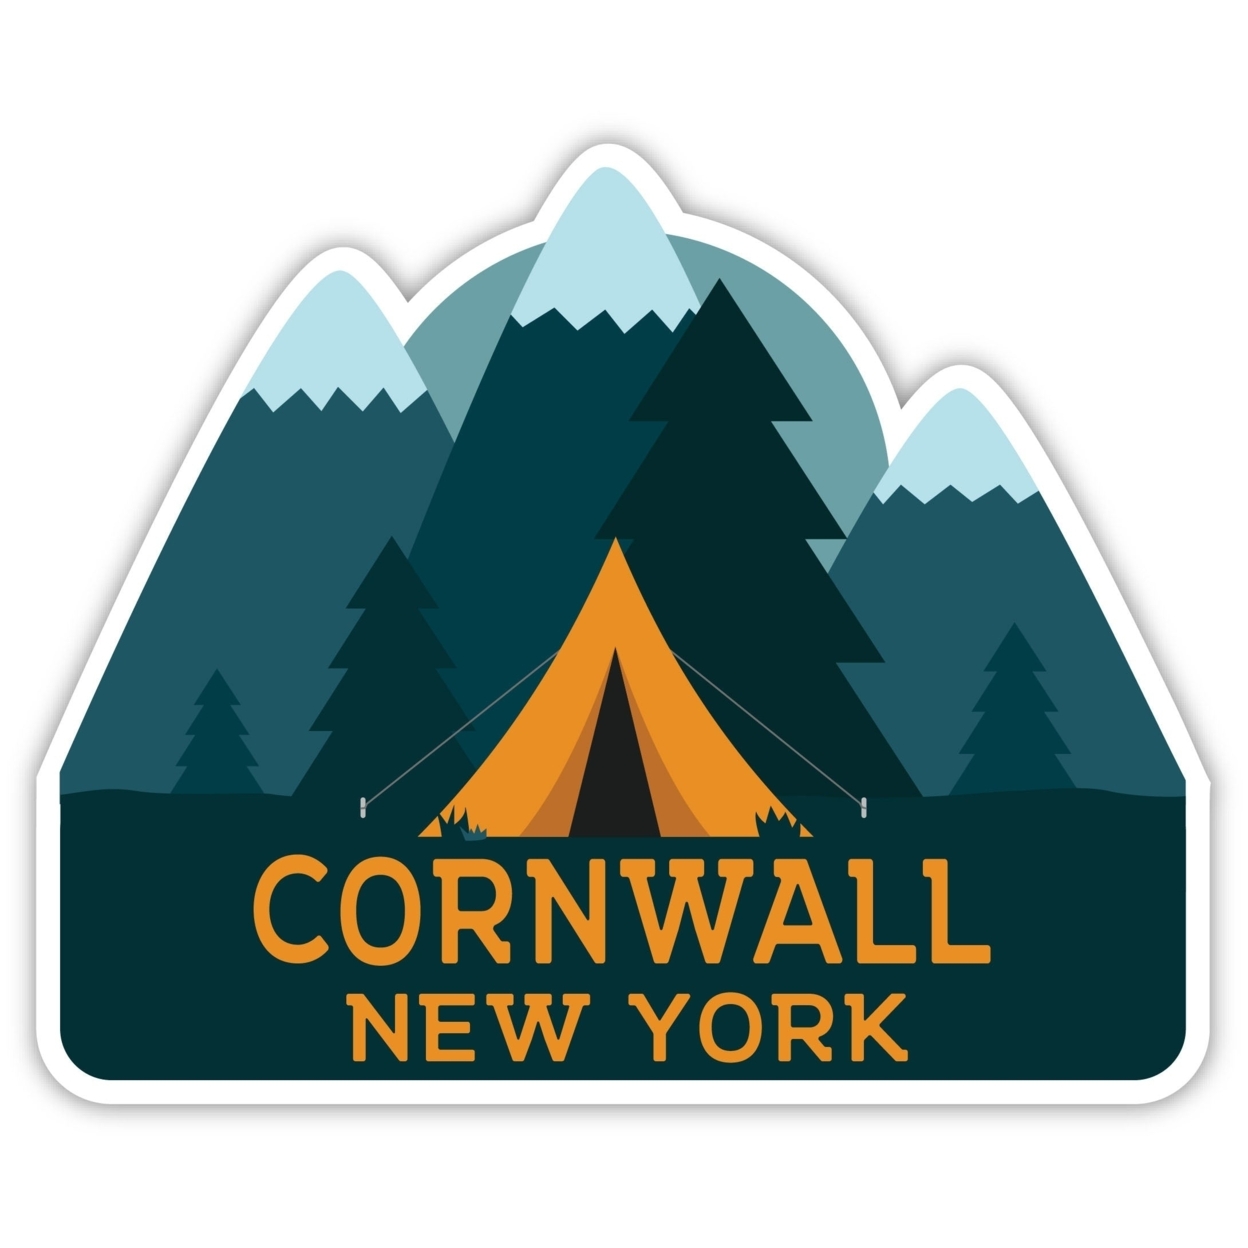 Cornwall New York Souvenir Decorative Stickers (Choose Theme And Size) - 4-Pack, 8-Inch, Tent